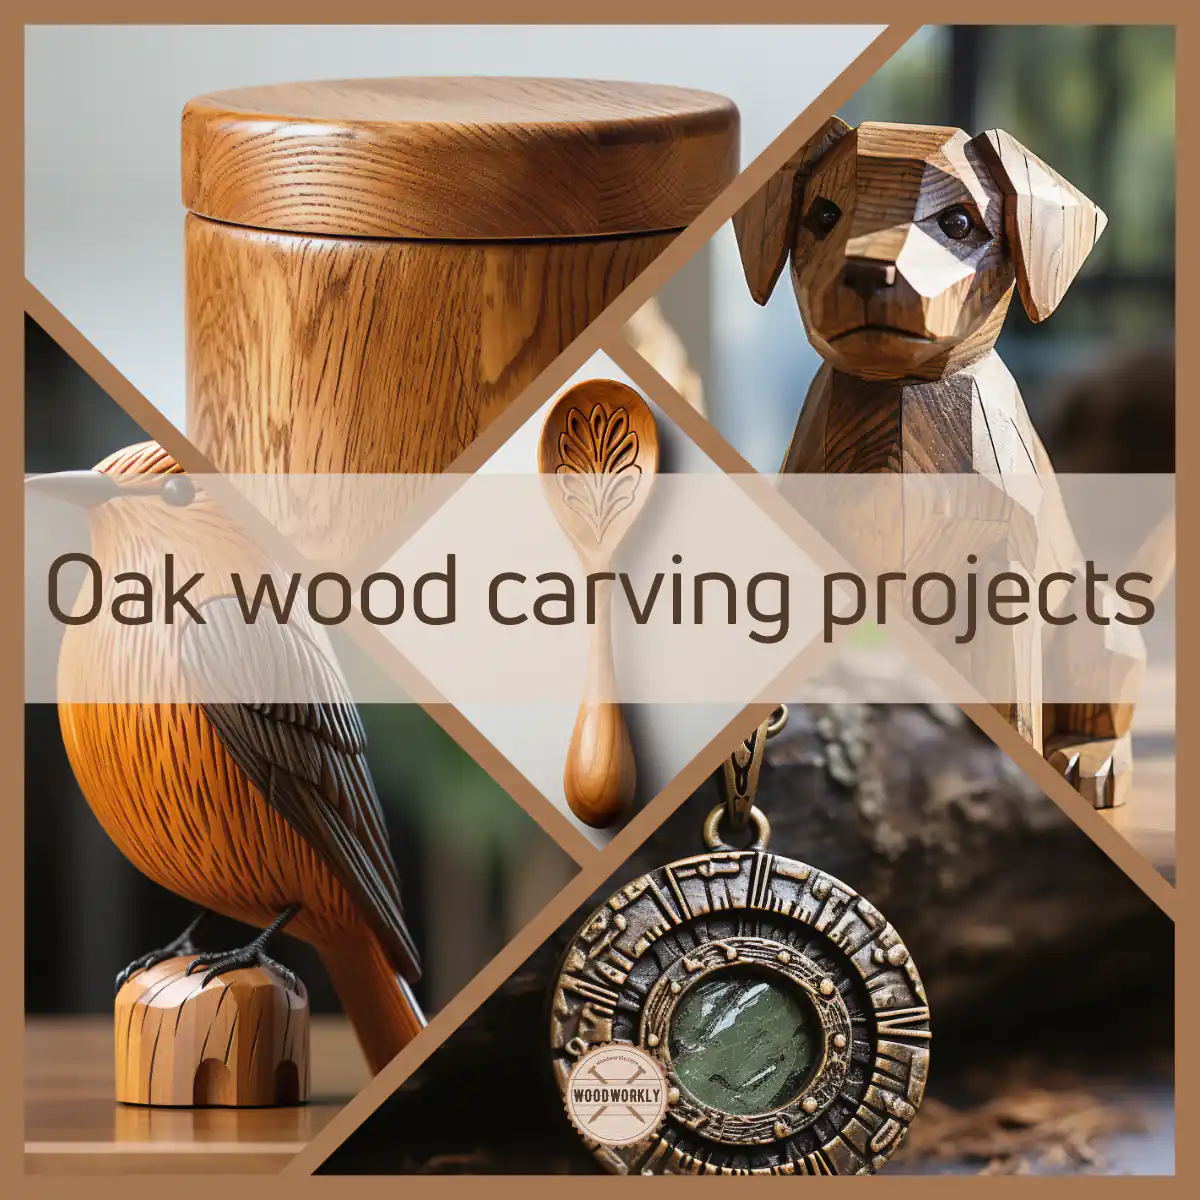 Oak wood carving projects